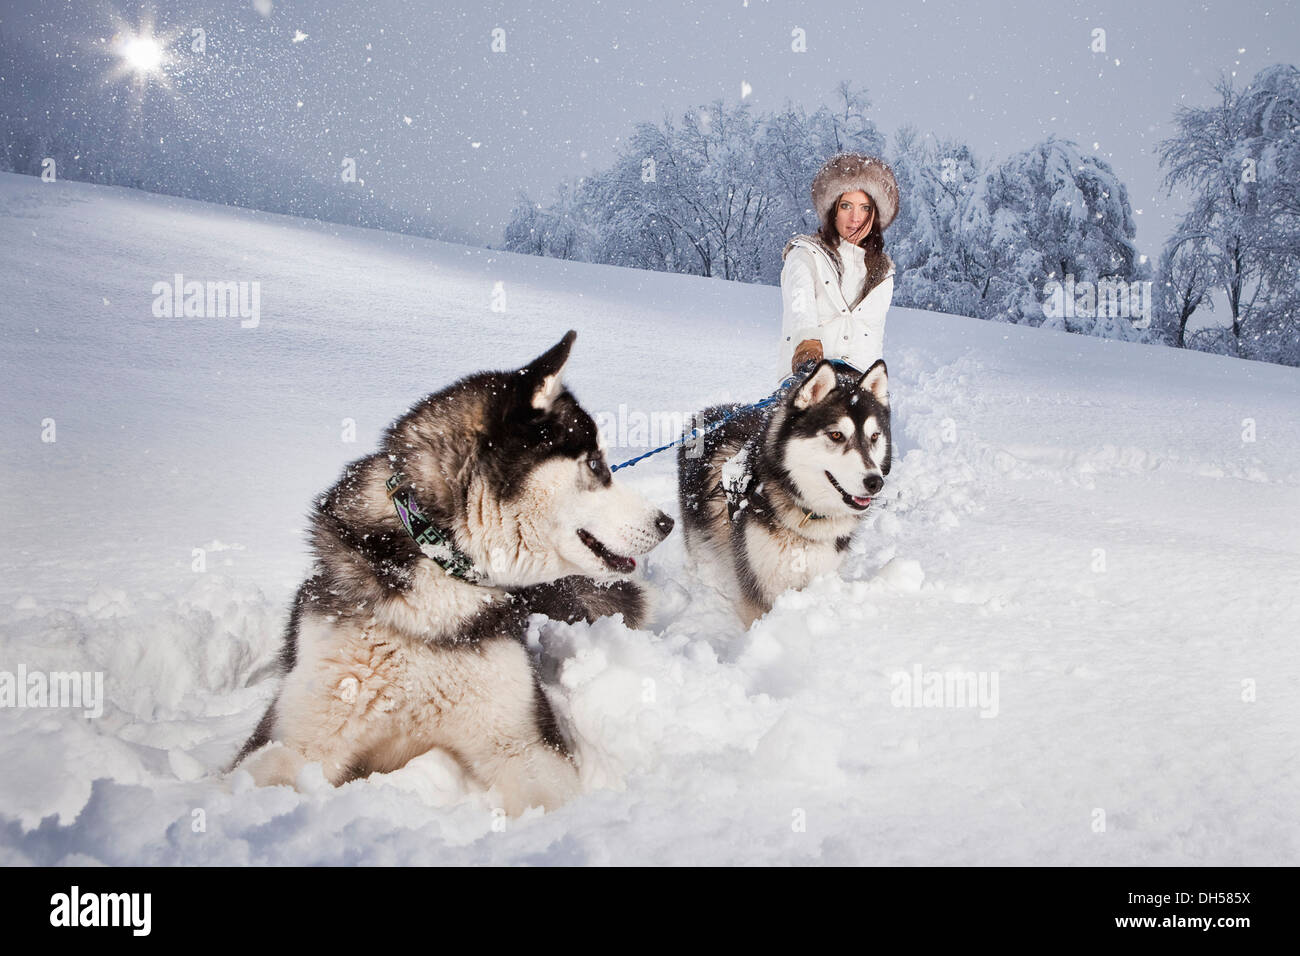 Young woman with huskies in the snow, Kolsassberg, Innsbruck-Stadt District, North Tyrol, Tyrol, Austria Stock Photo